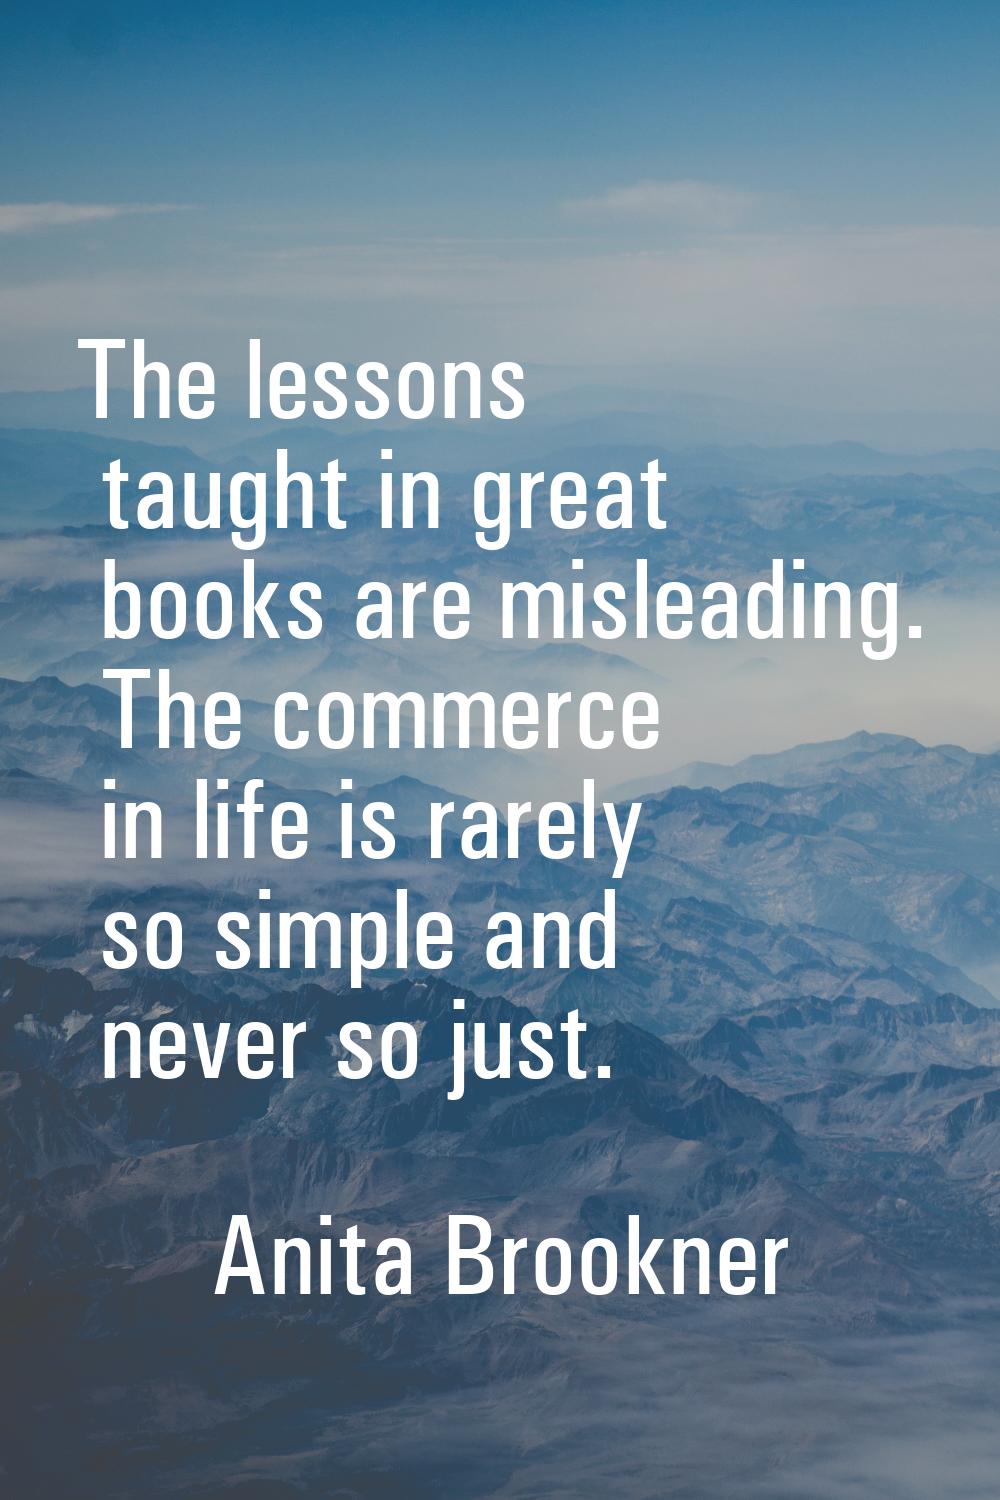 The lessons taught in great books are misleading. The commerce in life is rarely so simple and neve